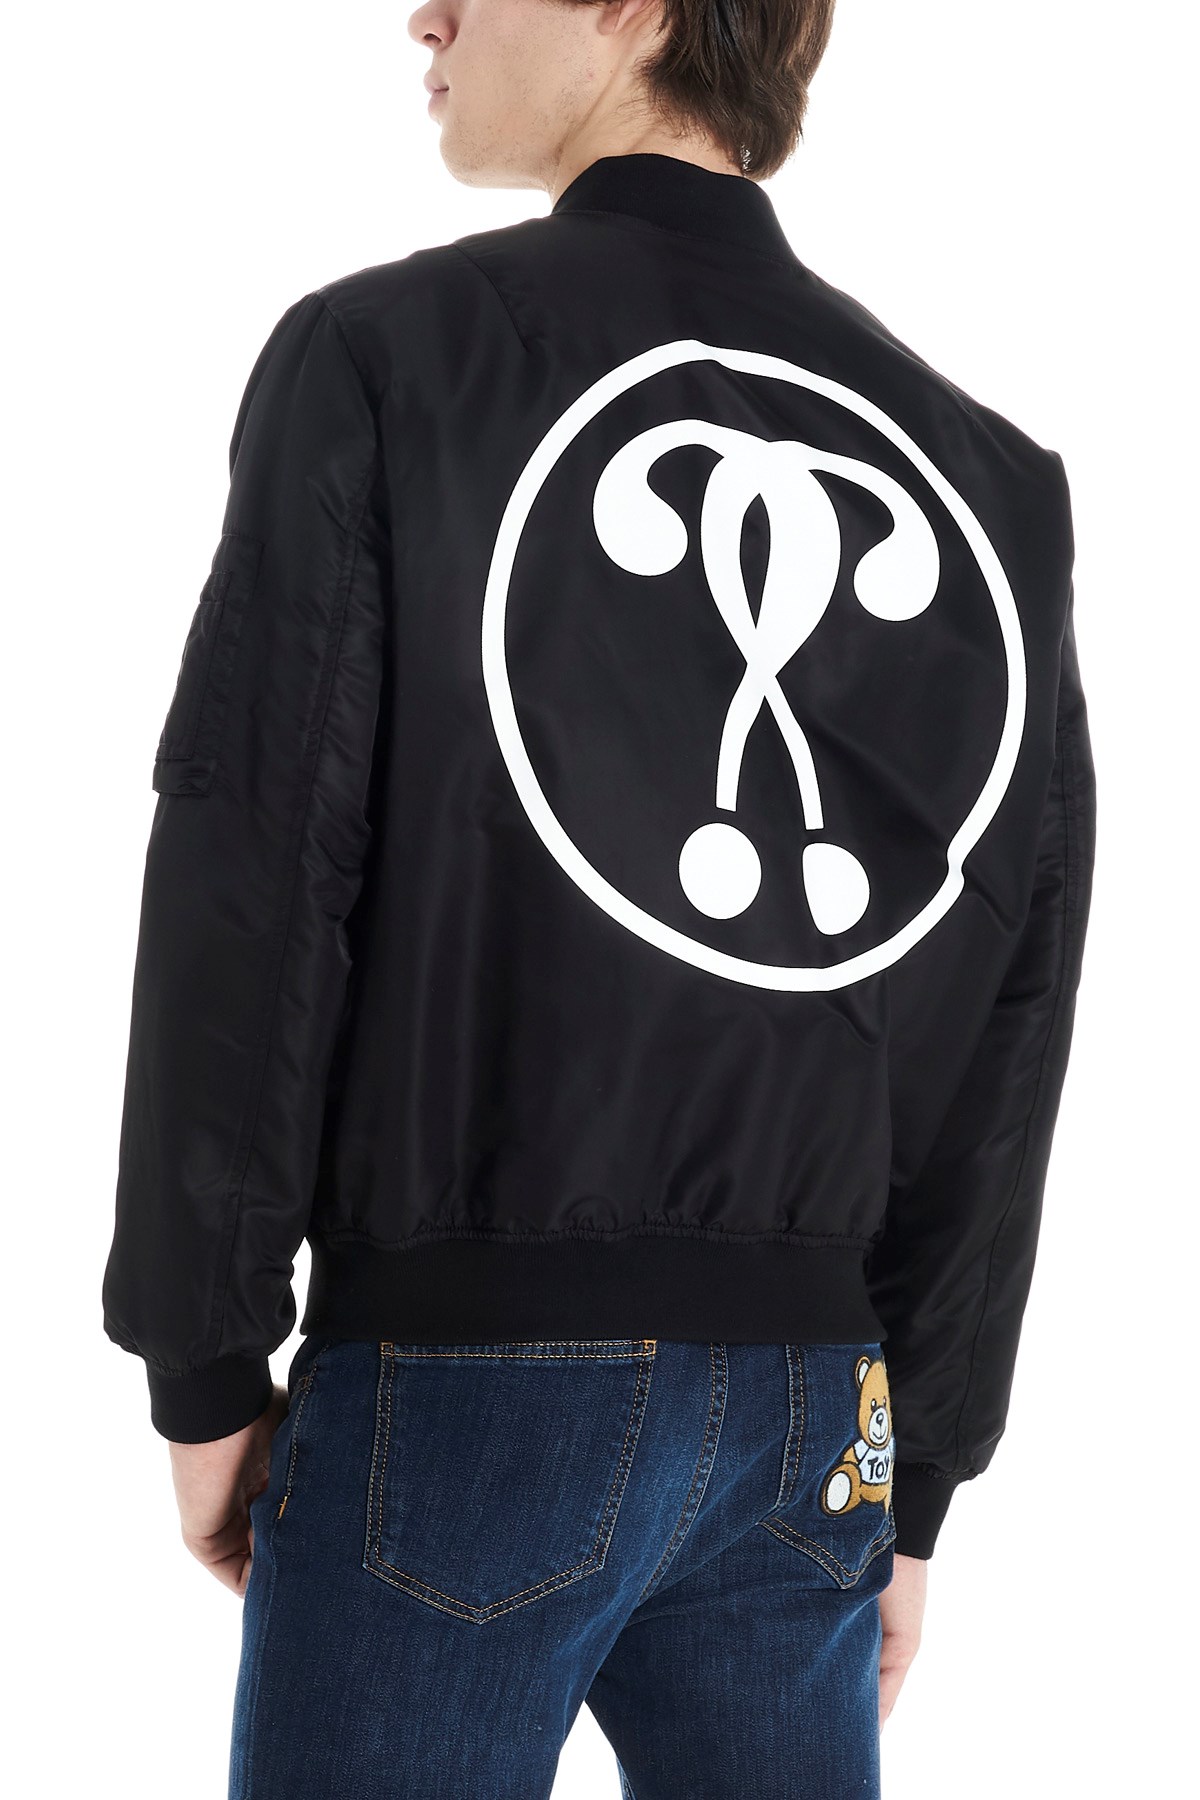 MOSCHINO 'Double Question Mark' Bomber Jacket